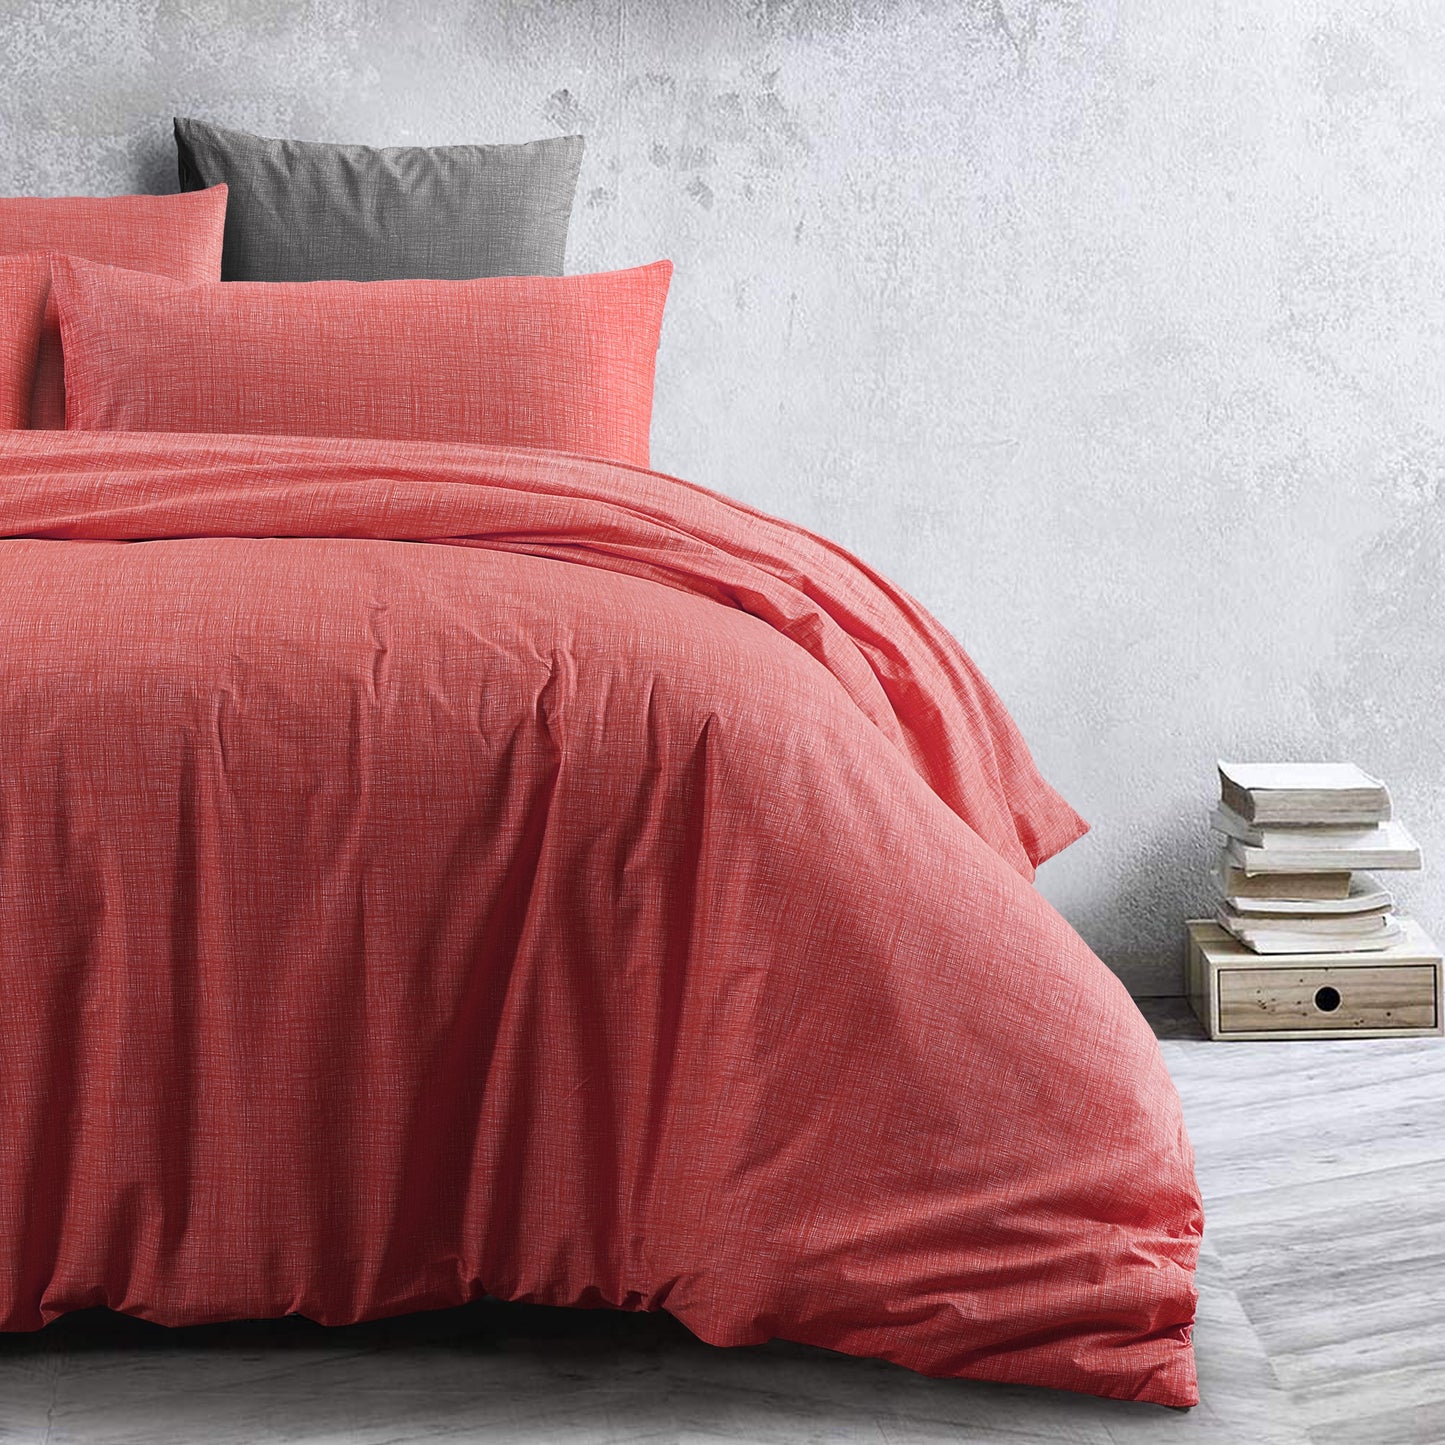 100 % Cotton Doona Cover Textured Print with Extra Standard Pillowcases | Living Coral